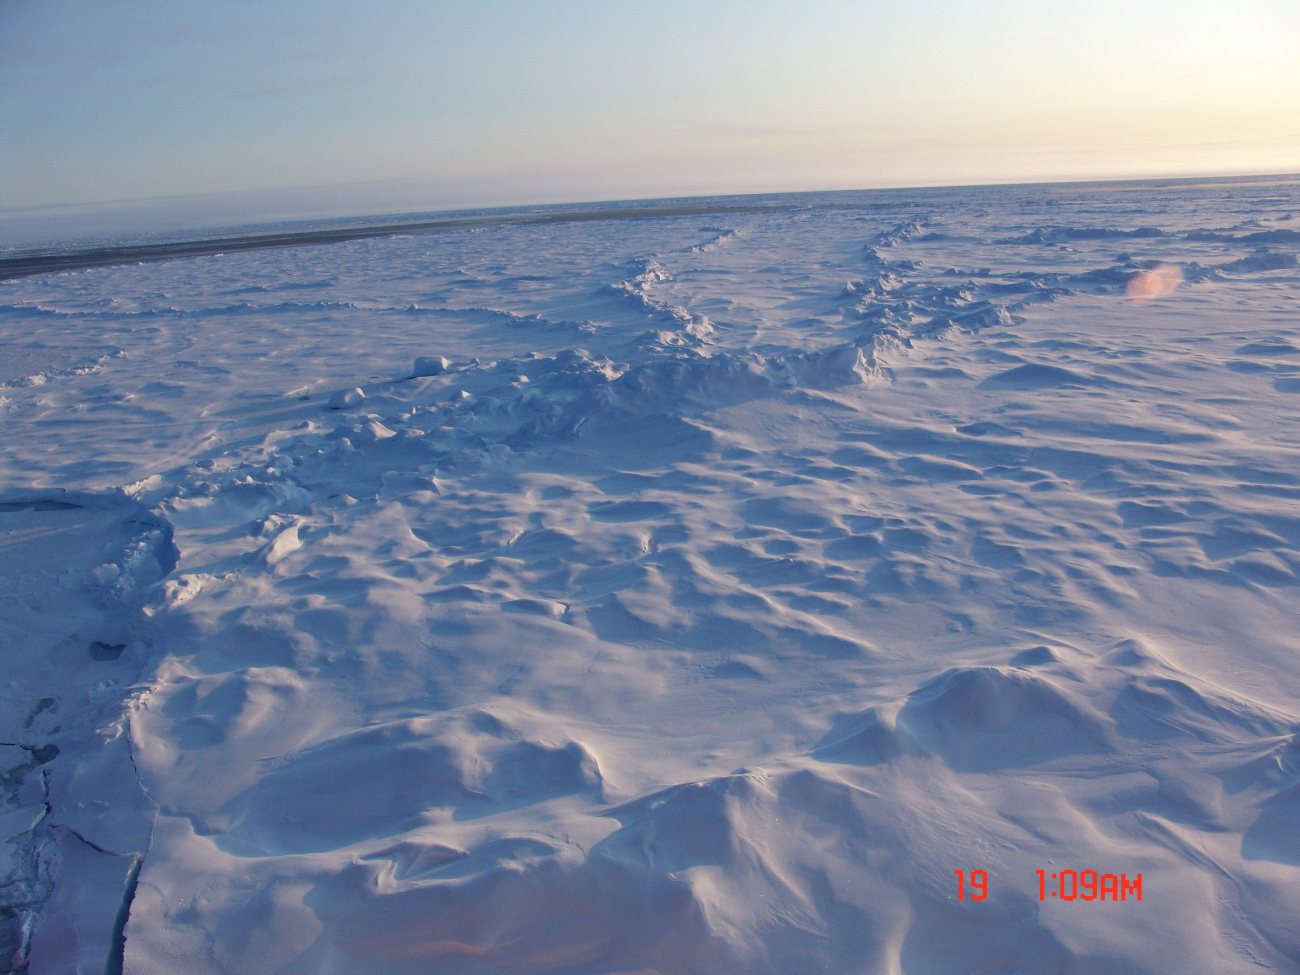 Ridges and hummocks in multi-year ice and an open lead